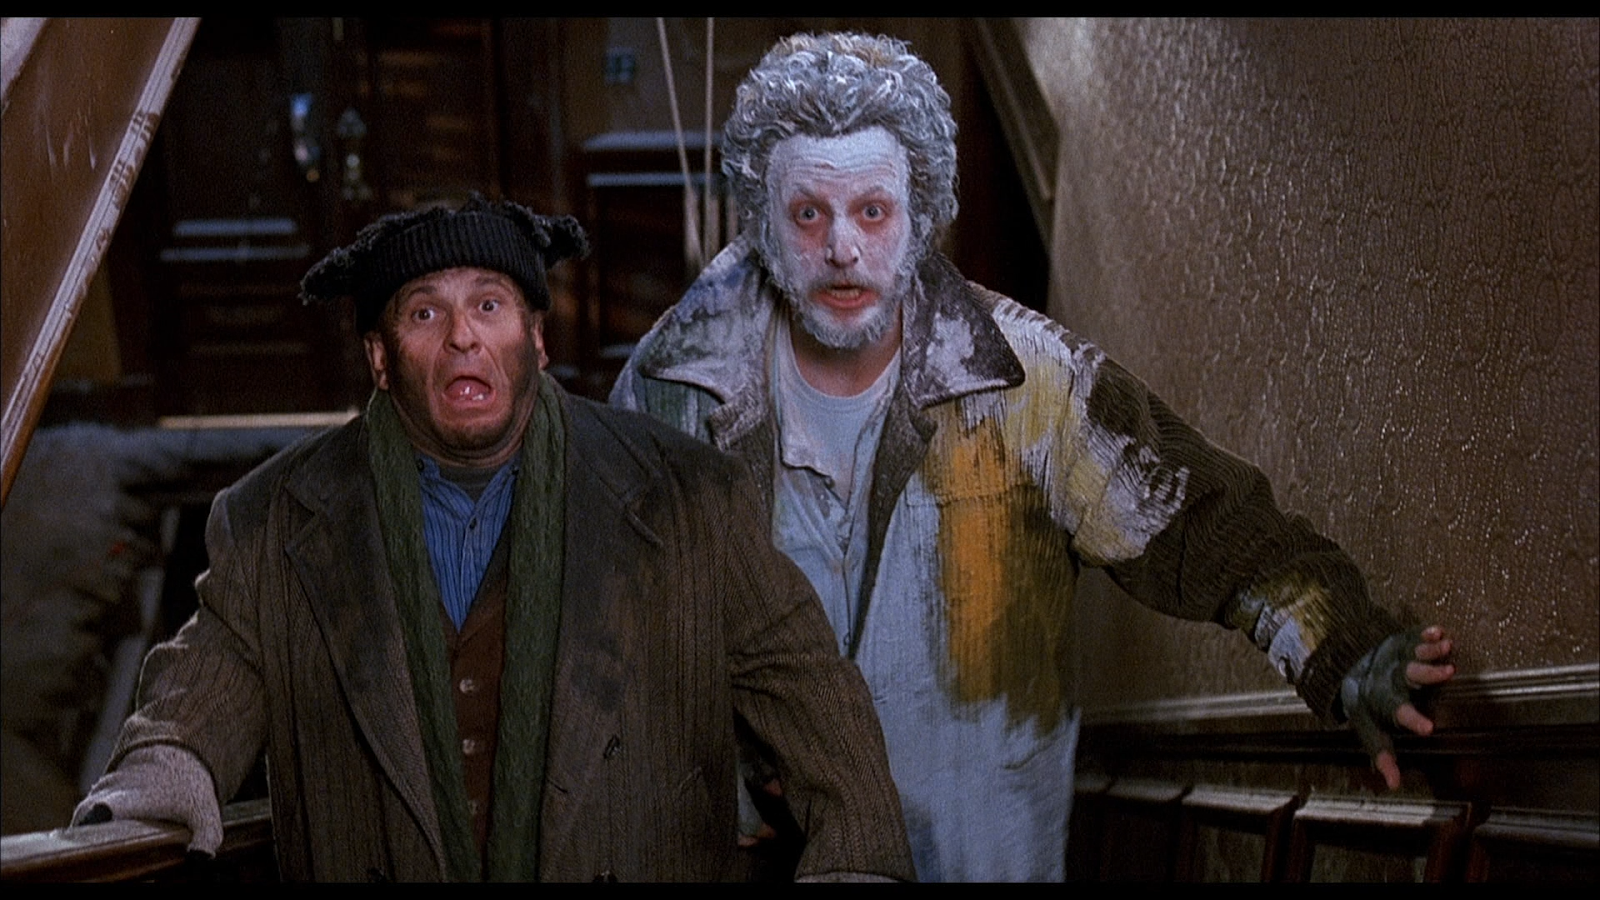 Home alone 2: lost in new york (1992) .